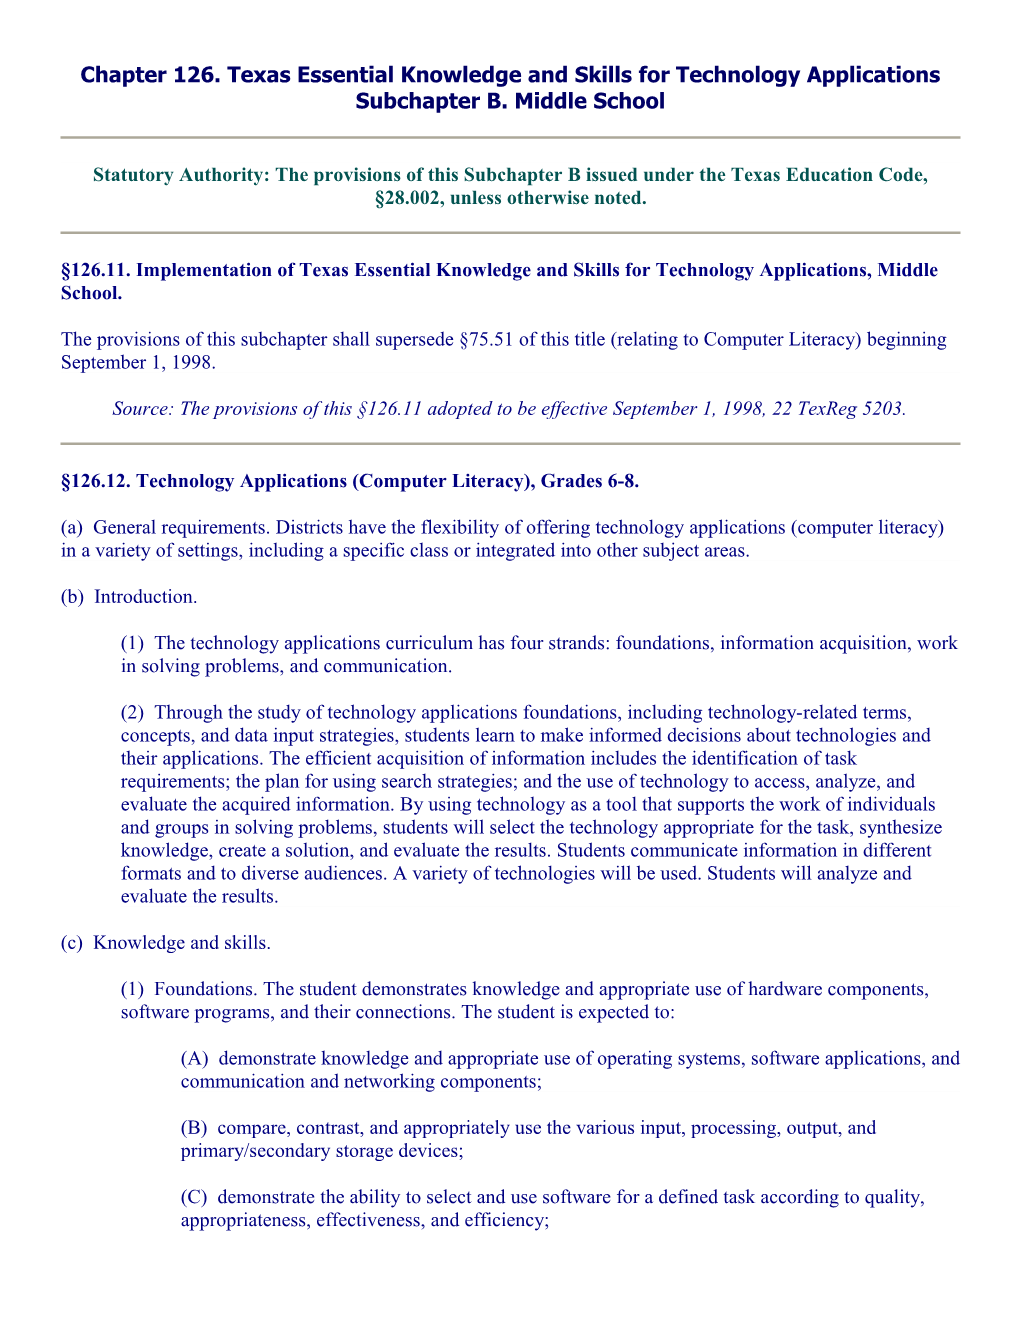 126.11. Implementation of Texas Essential Knowledge and Skills for Technology Applications